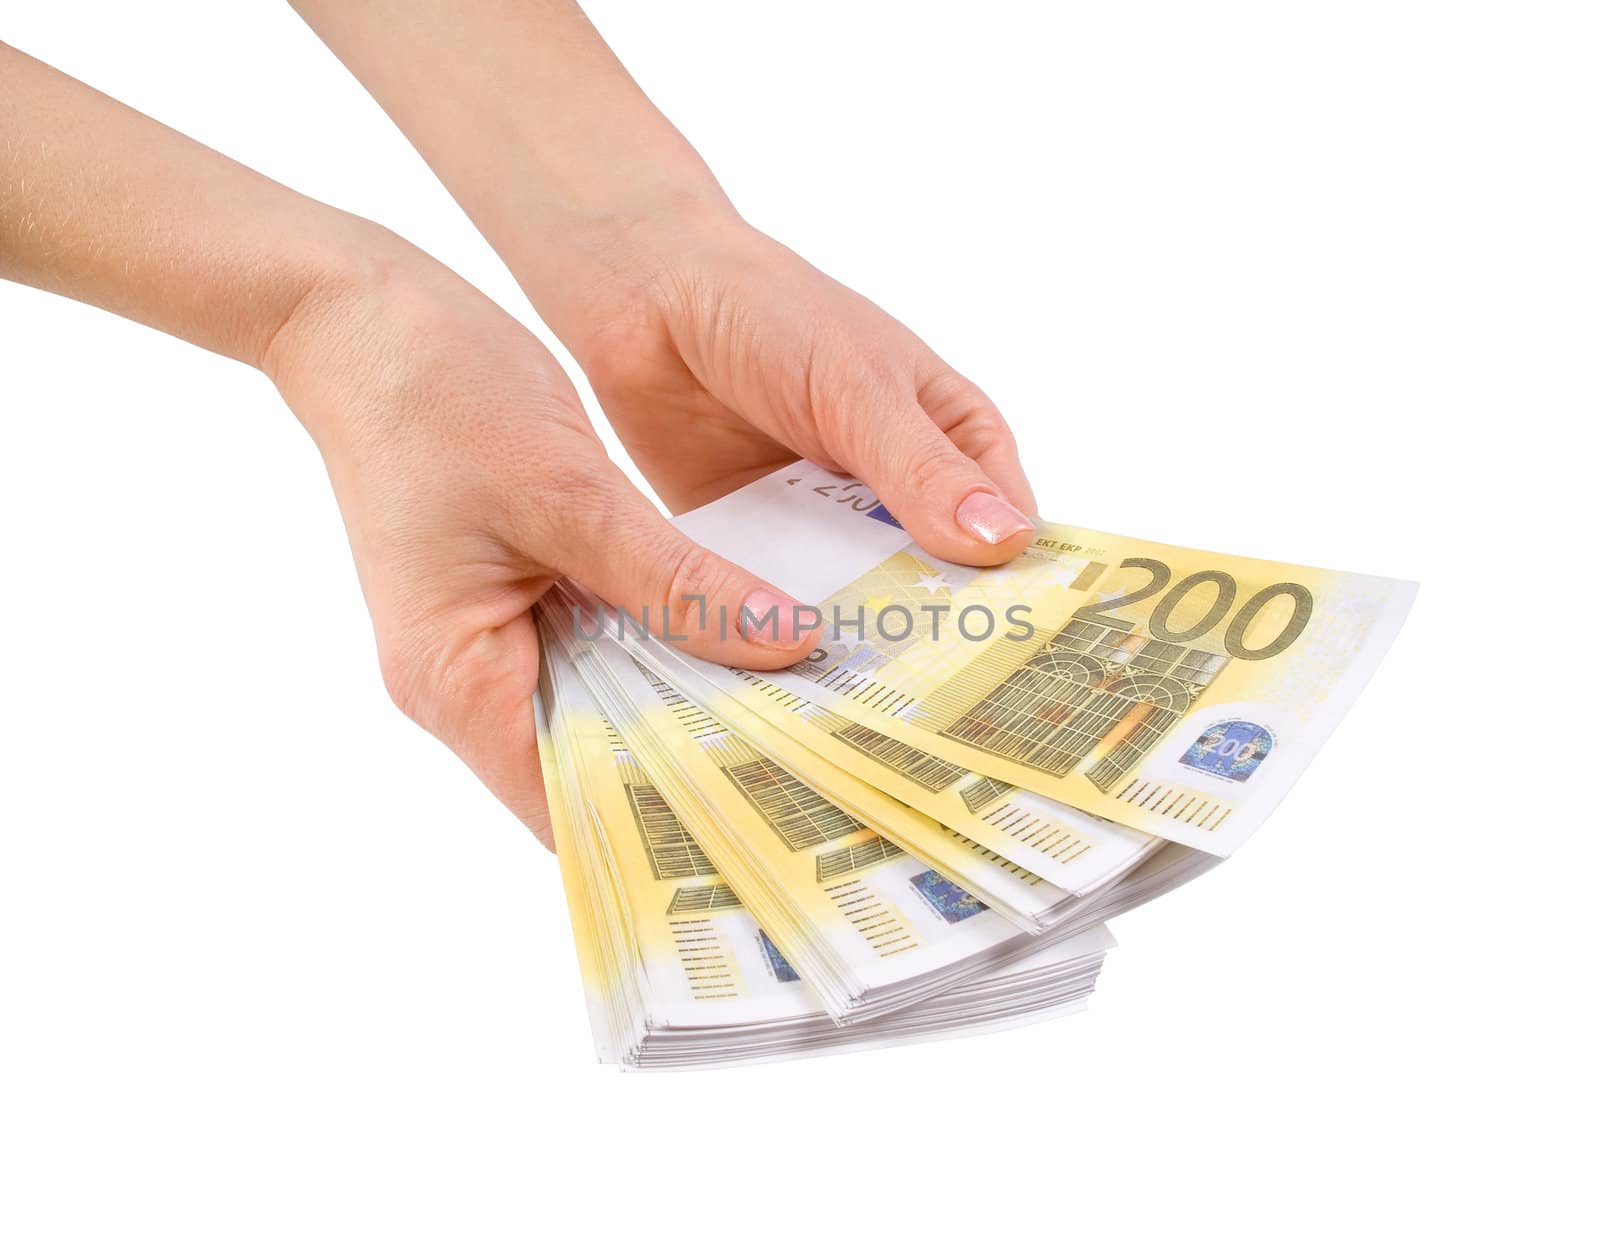 Hands with a bundle of banknotes two hundred euros by BIG_TAU